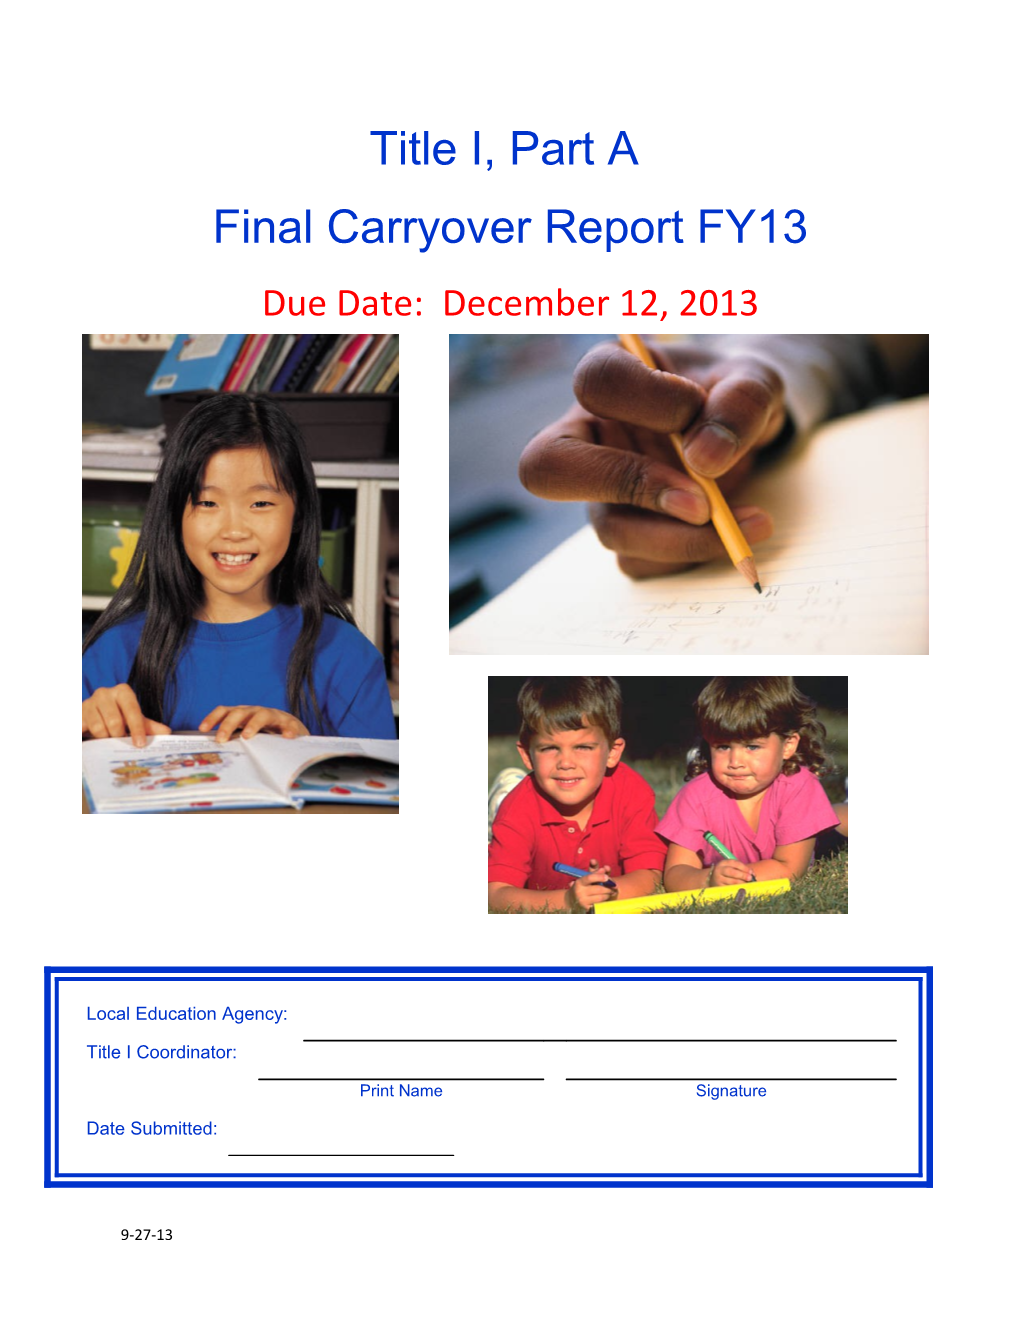 FY13 Title I Carryover Report